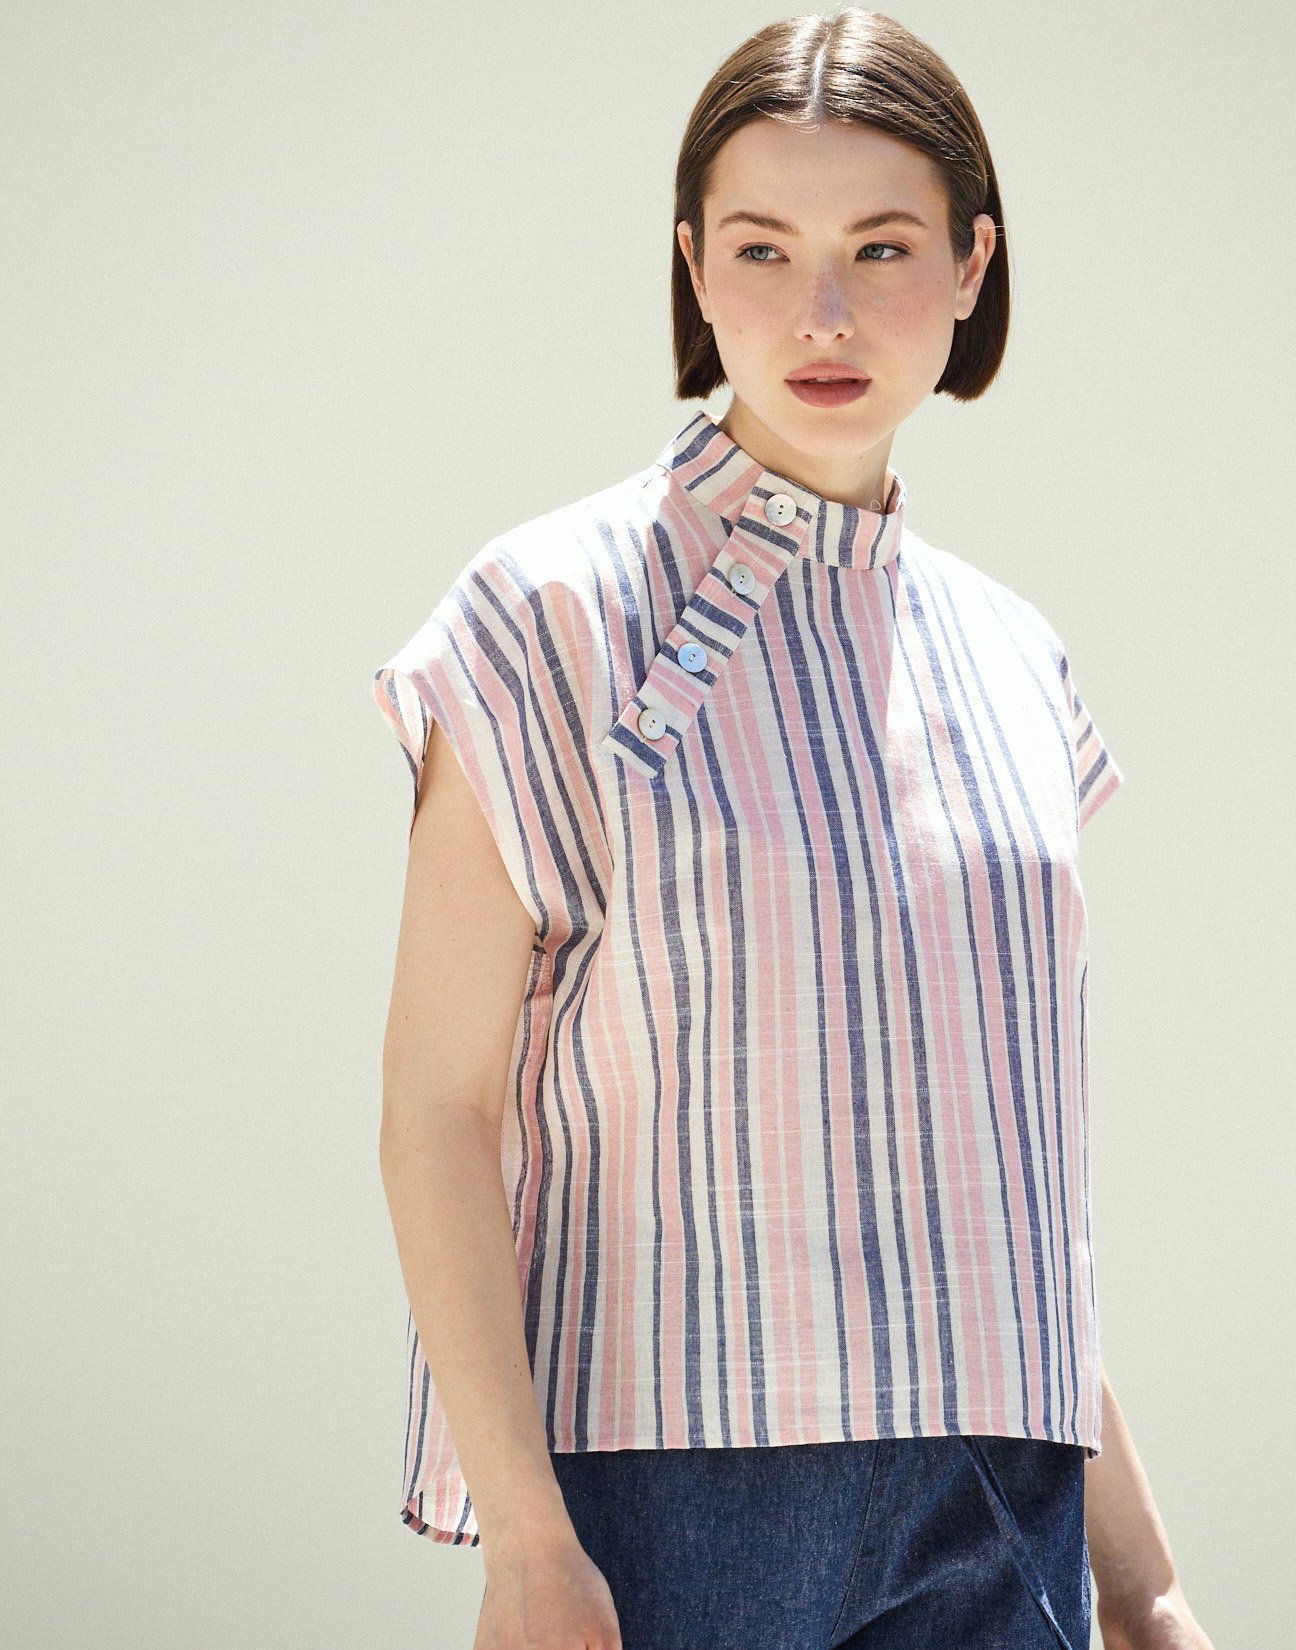 Striped top with buttons